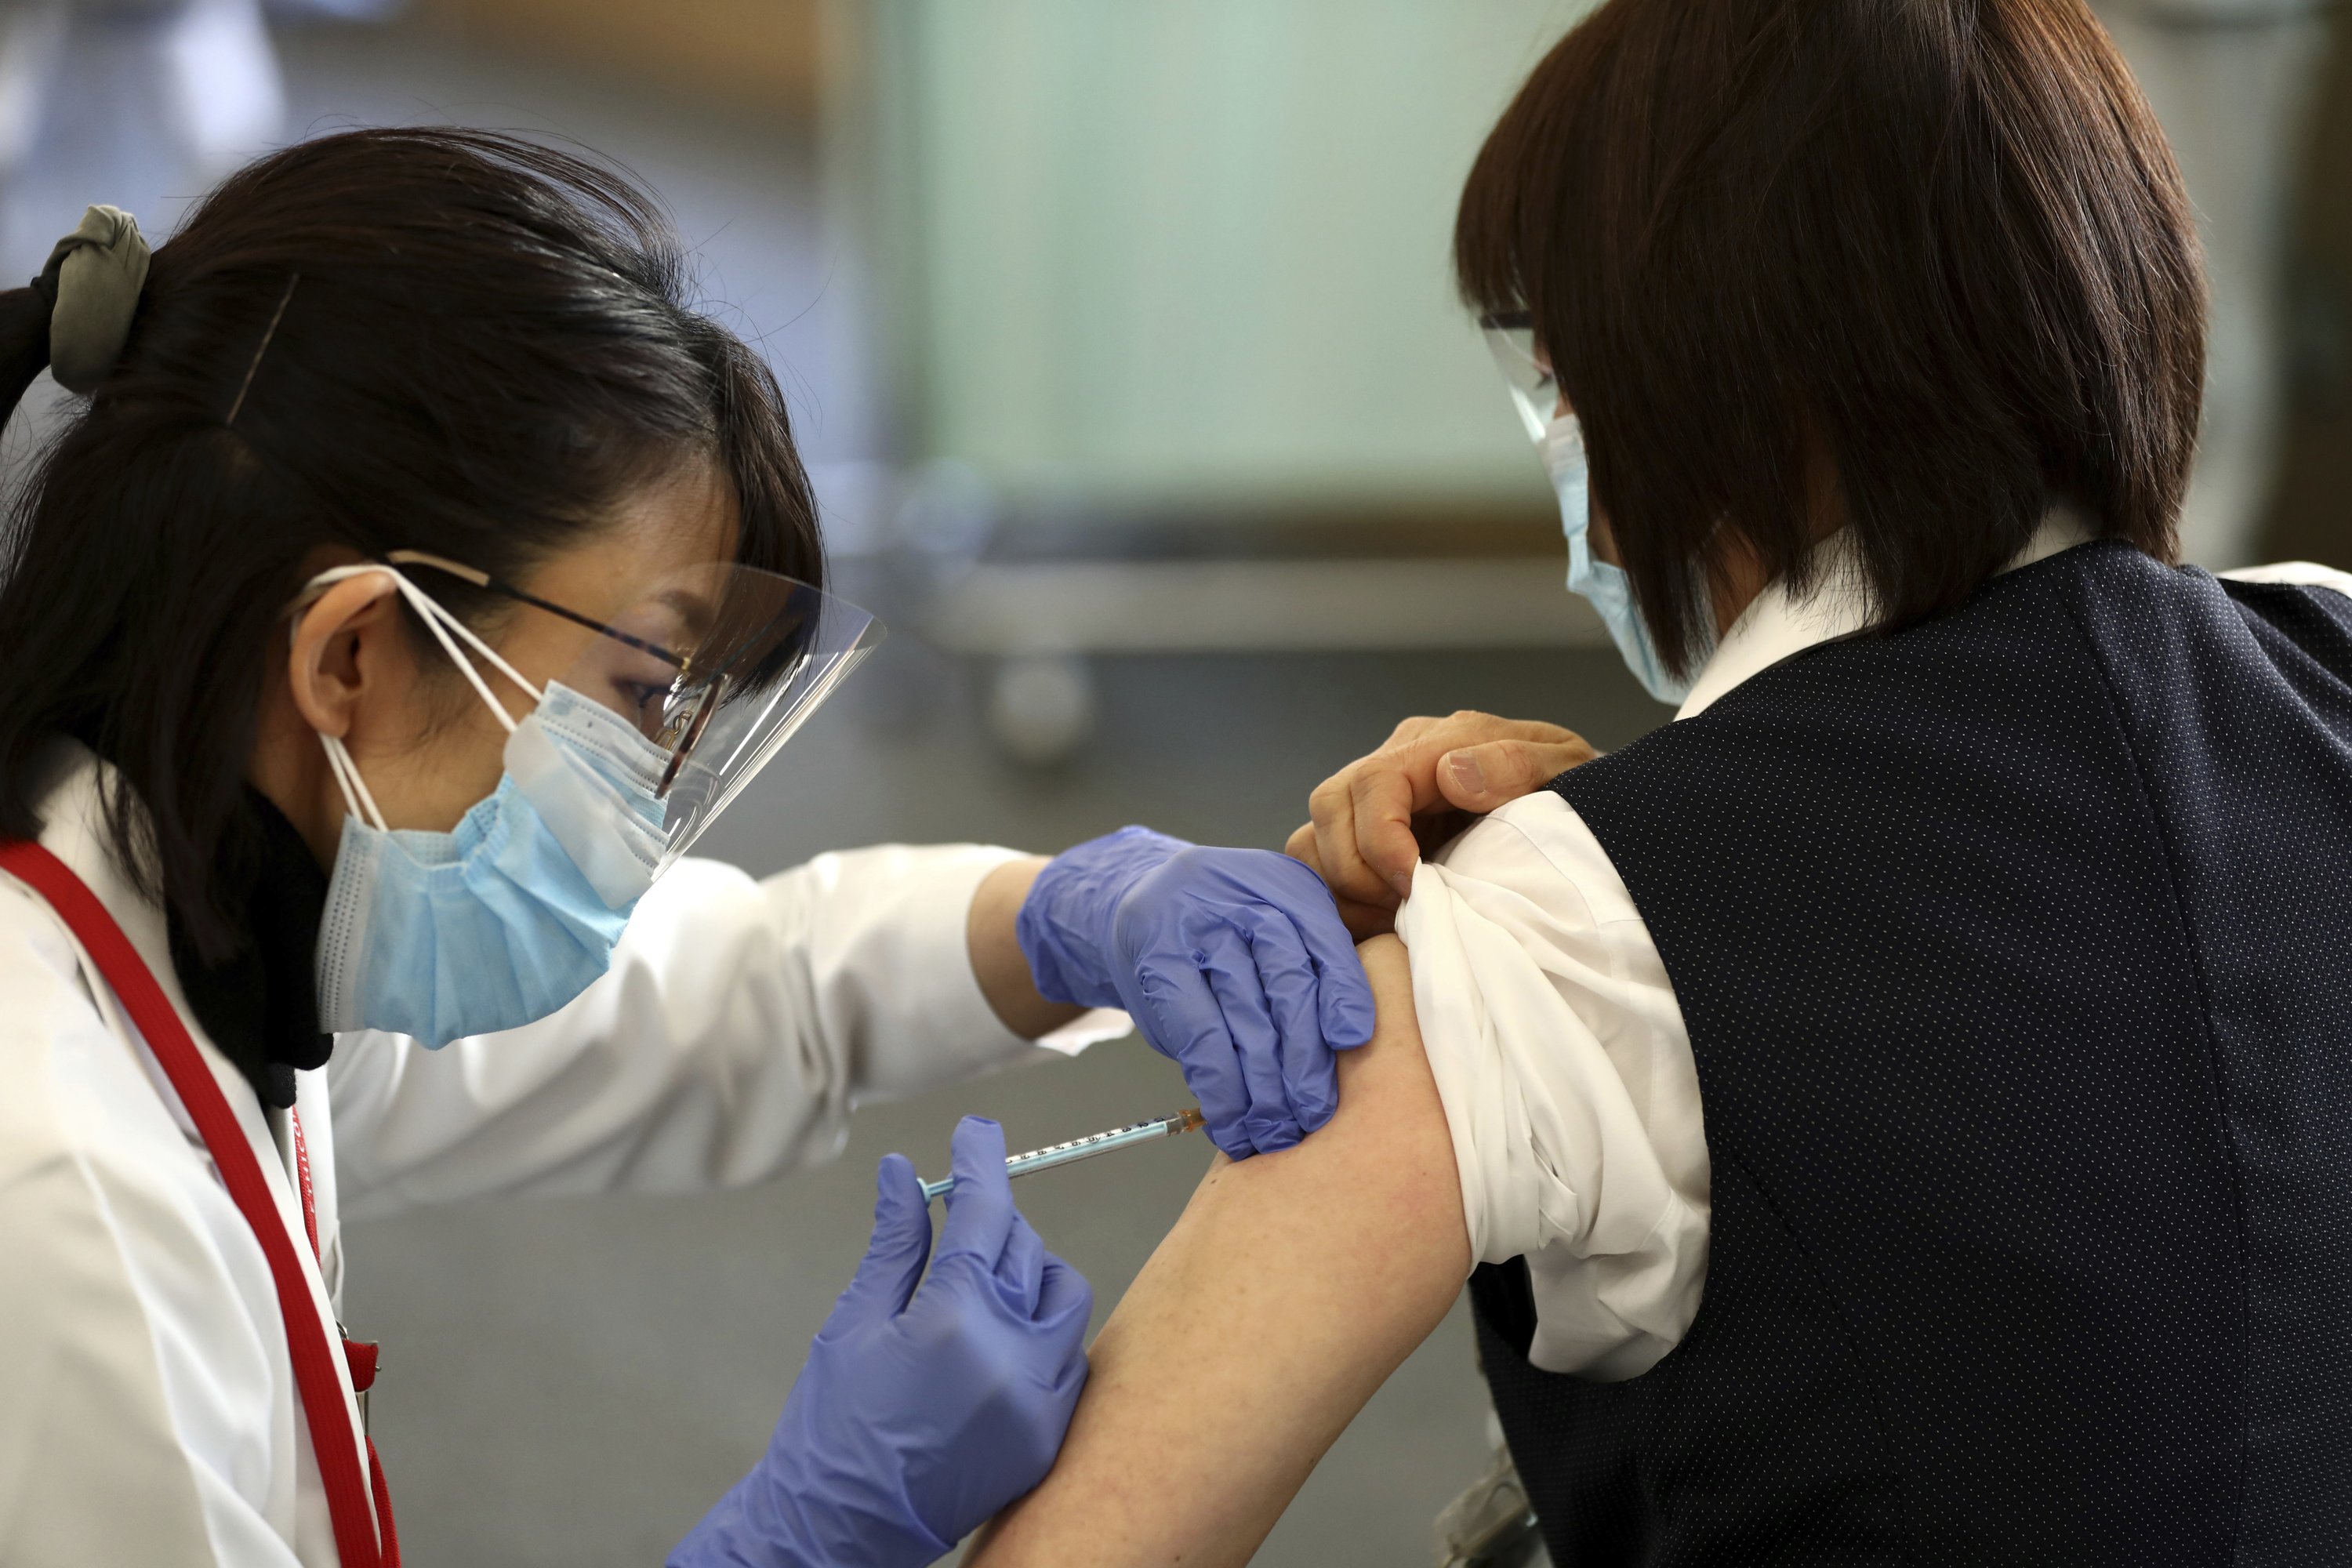 Japan begins COVID-19 vaccinations with an eye on the Olympics